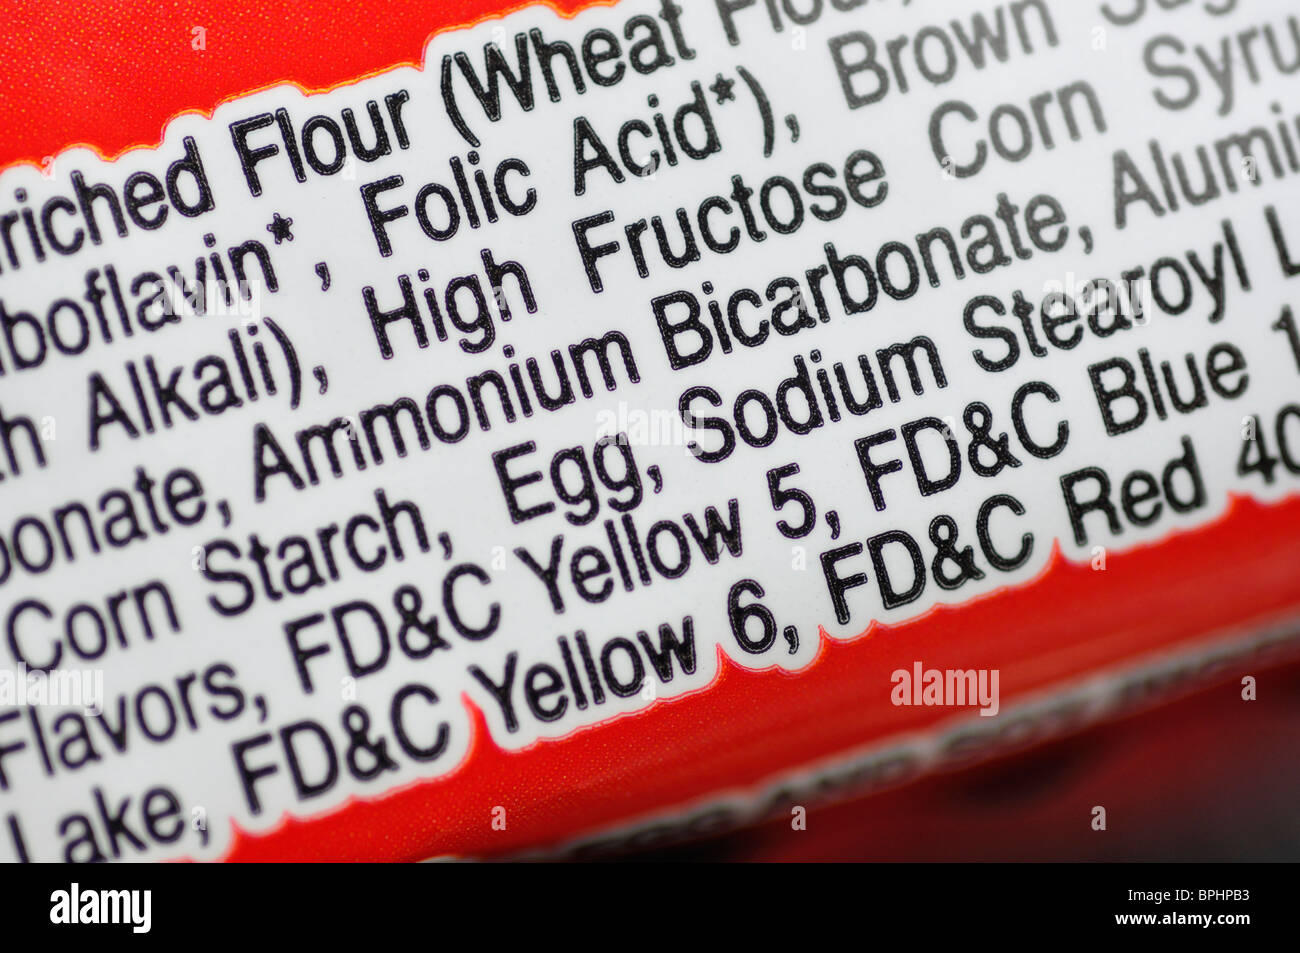 Nutrition information on food package Stock Photo